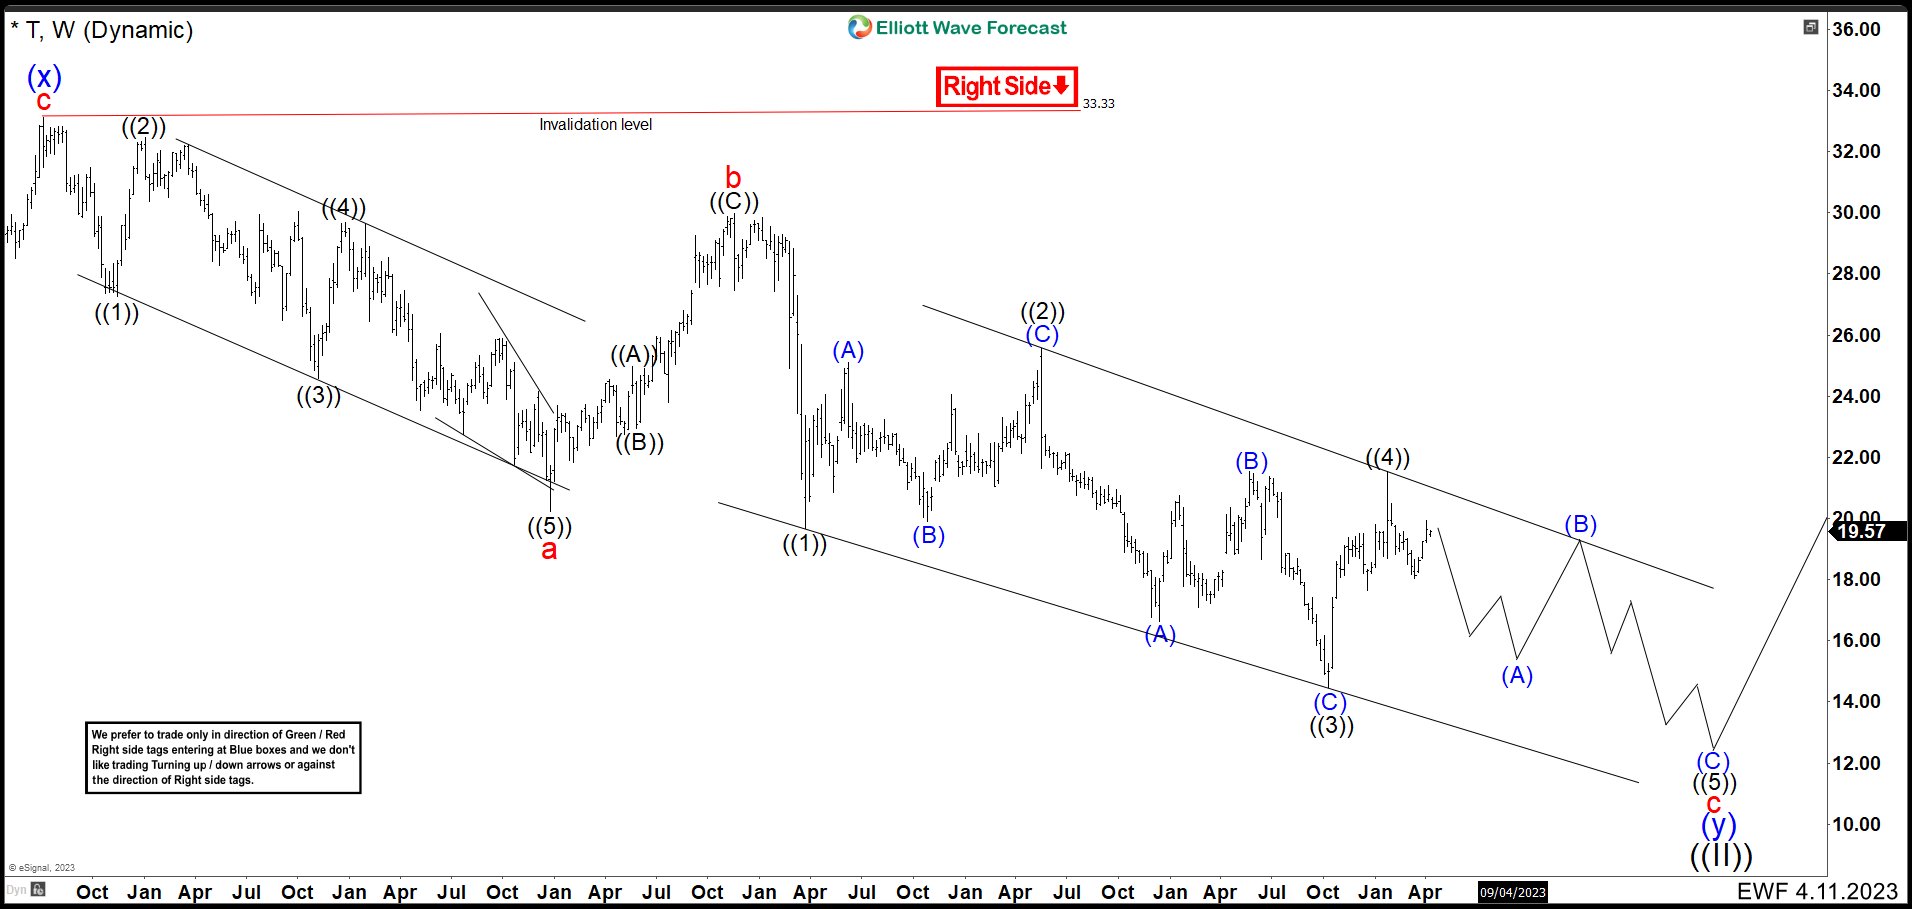 Elliott Wave Suggests AT&T ($T) Stock Price Should Continue Losing Value